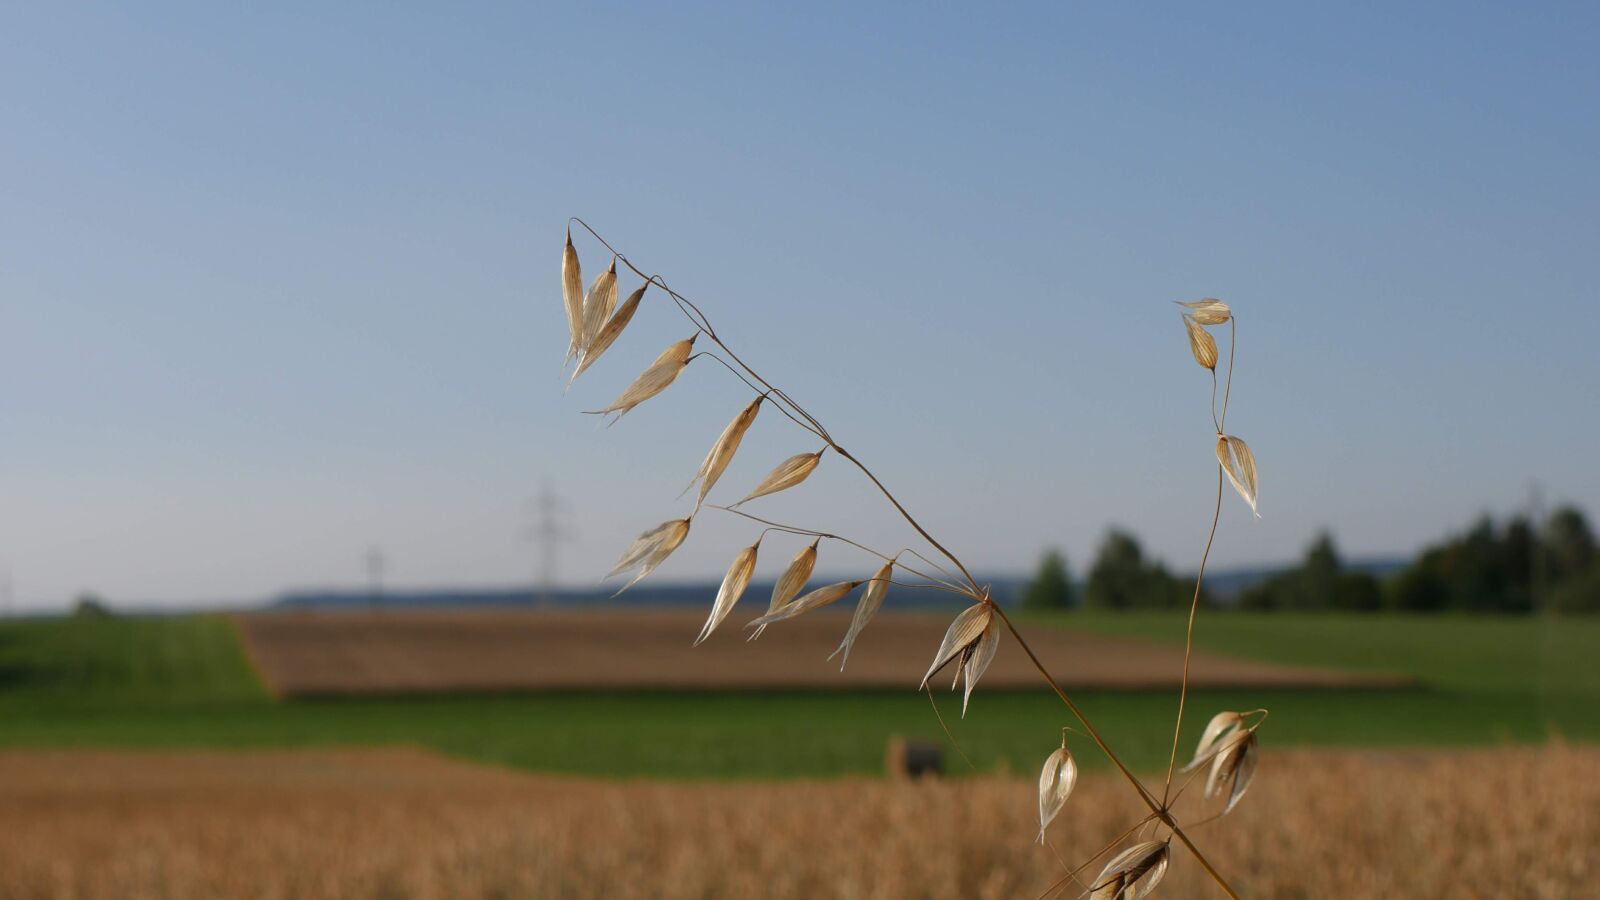 Panasonic DMC-G70 sample photo. Field, cereals, agriculture photography